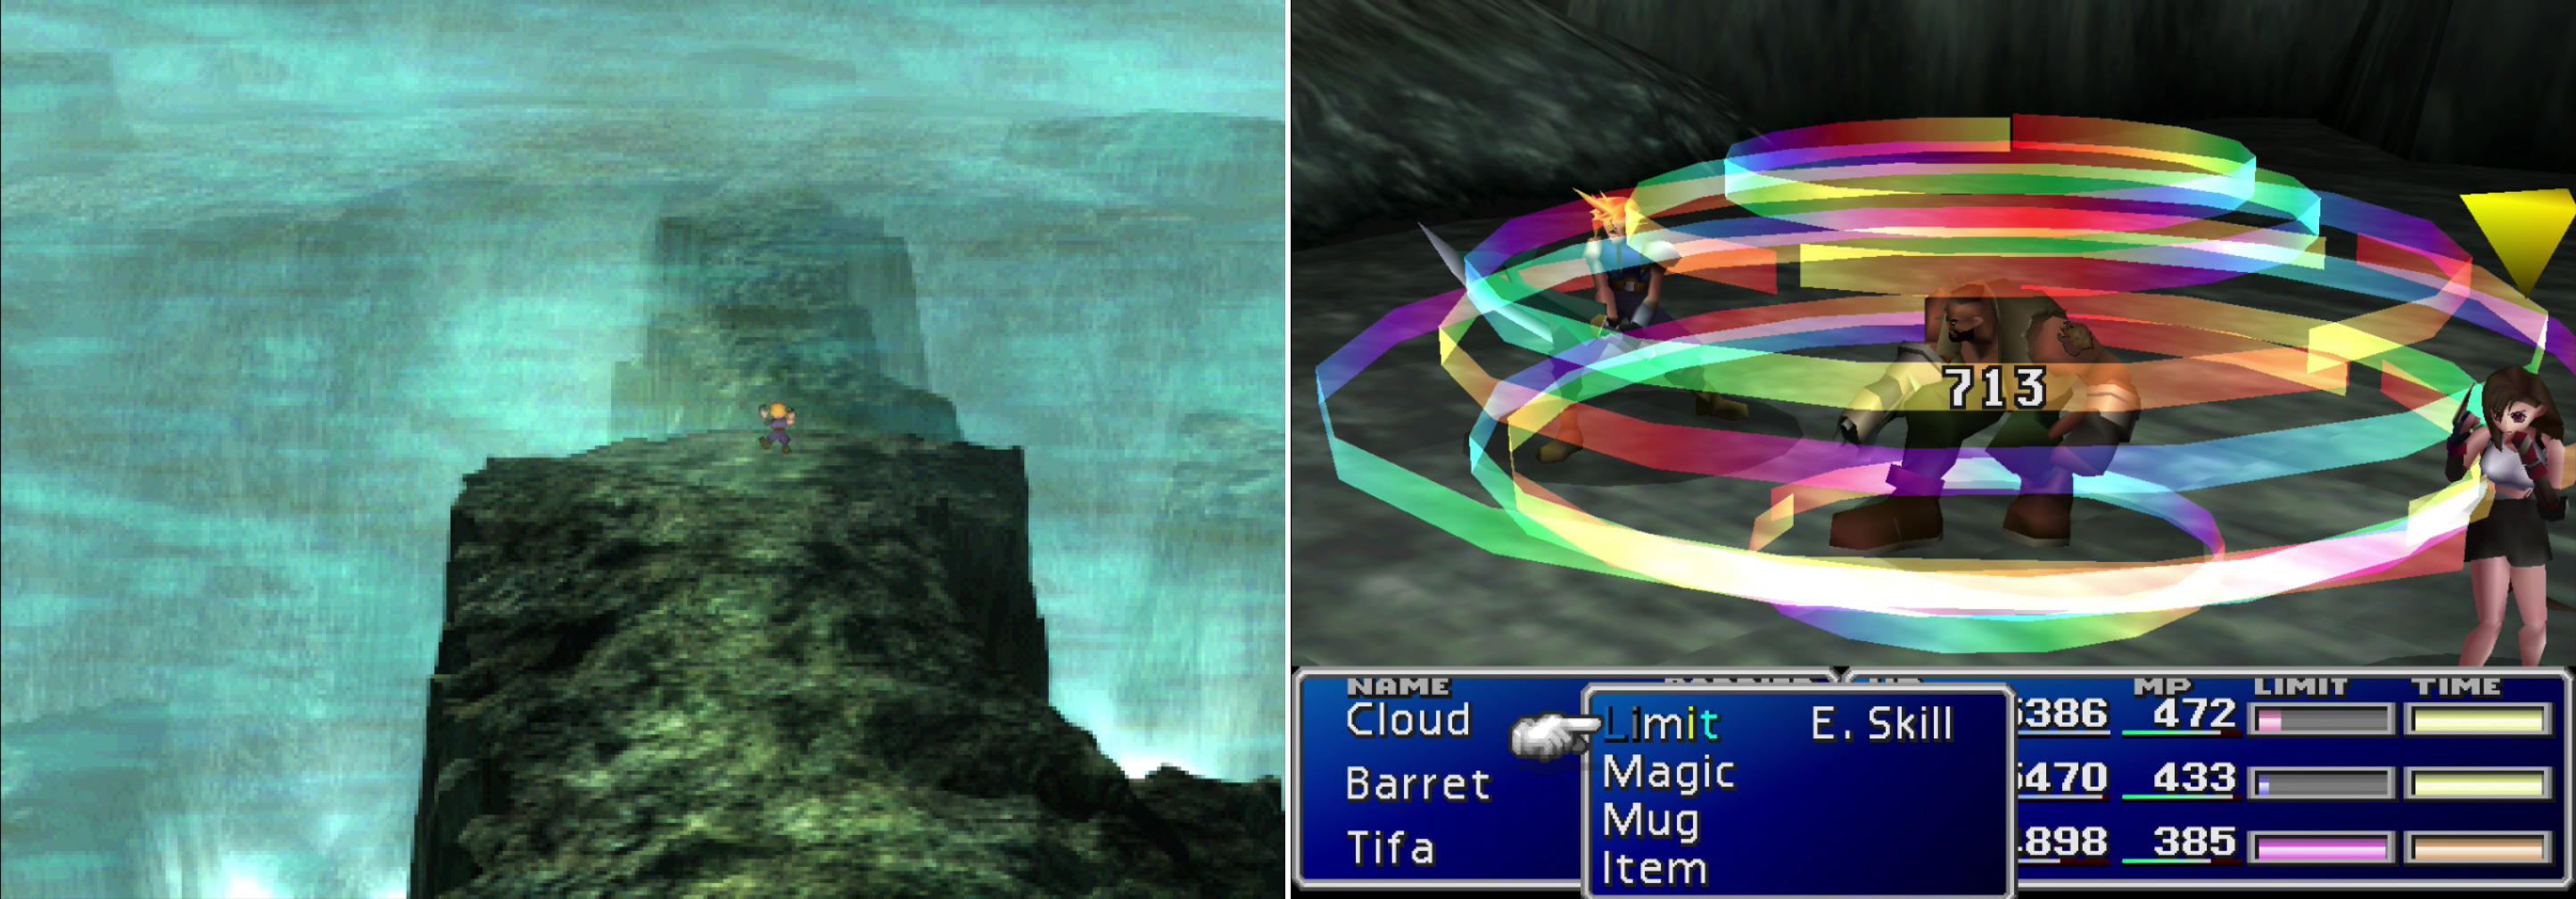 If you cross at the wrong time, you’ll be rebuffed by the elements (left) and forced to fight some Wind Wings, which can cast “Aero 3” (right).